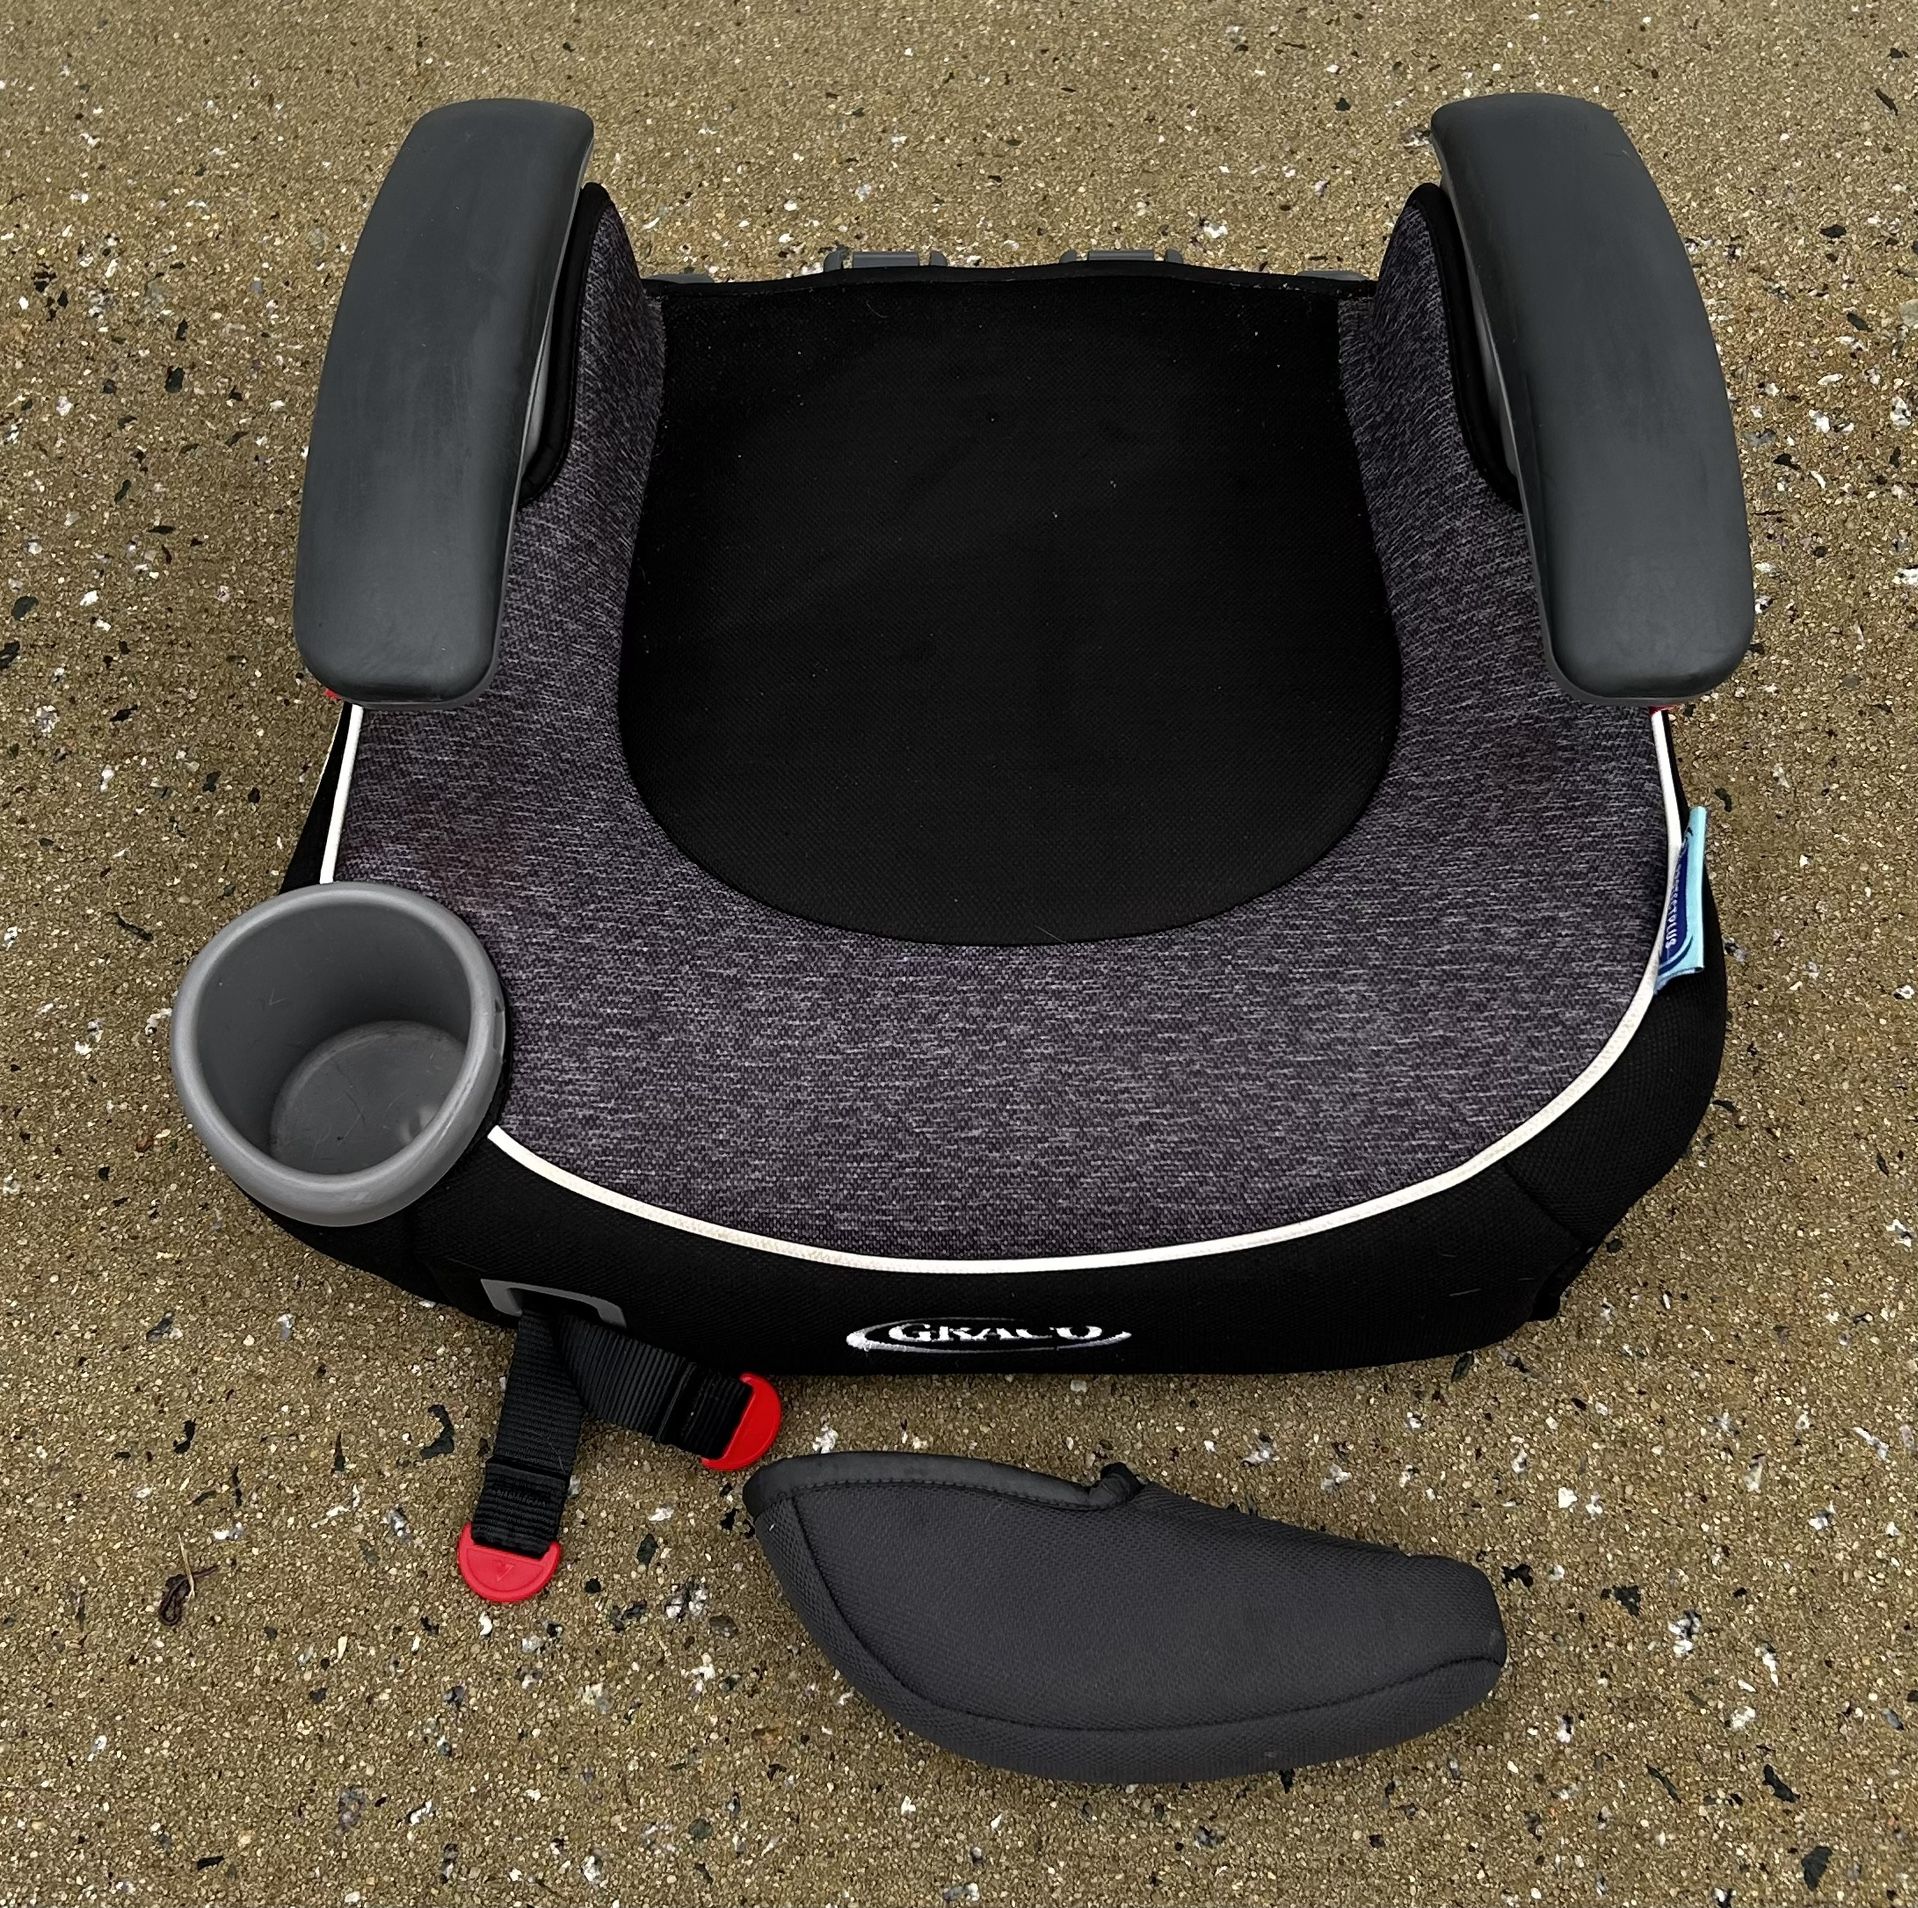 Graco Turbo LX Backless Booster Seat For Big Kids